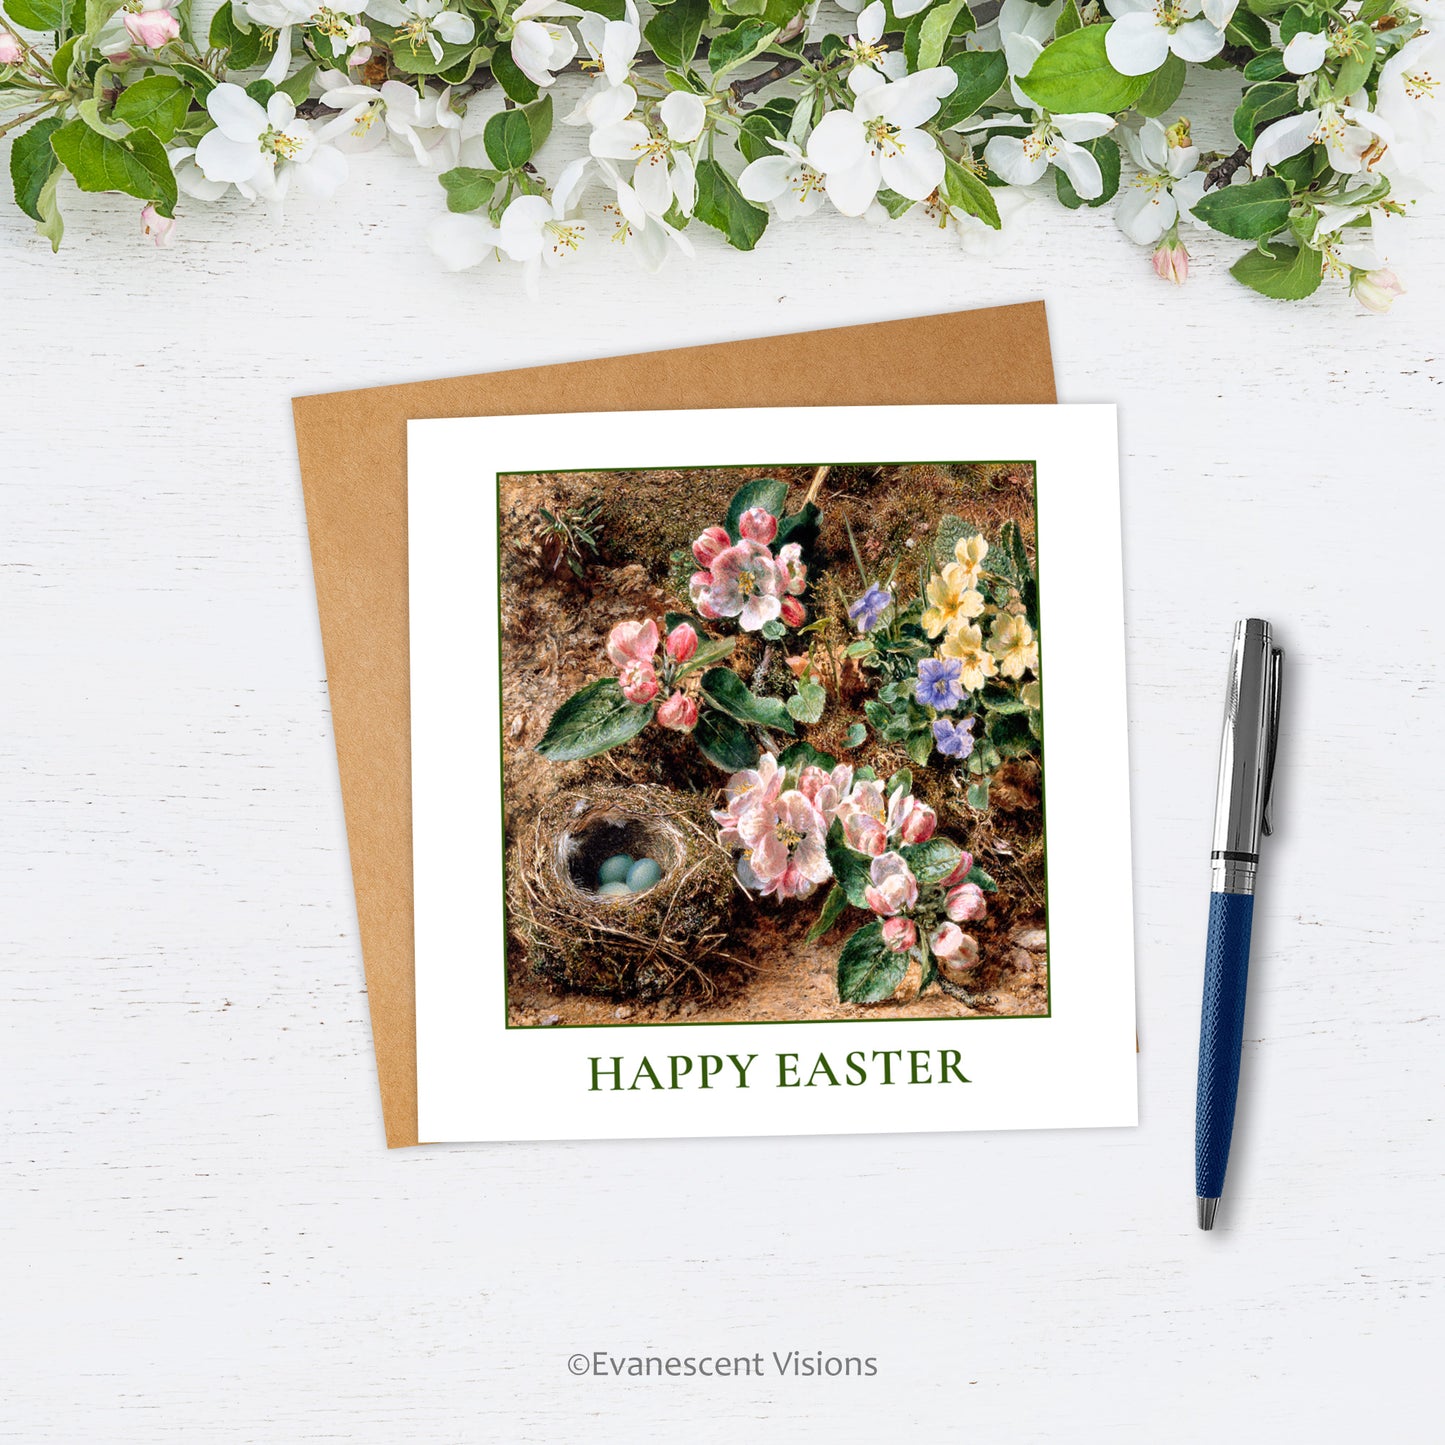 Happy Easter Card and envelope with design, 'Birds Nest, Apple Blossom and Primroses' by William Henry Hunt on white surface with pen and white blossom above.